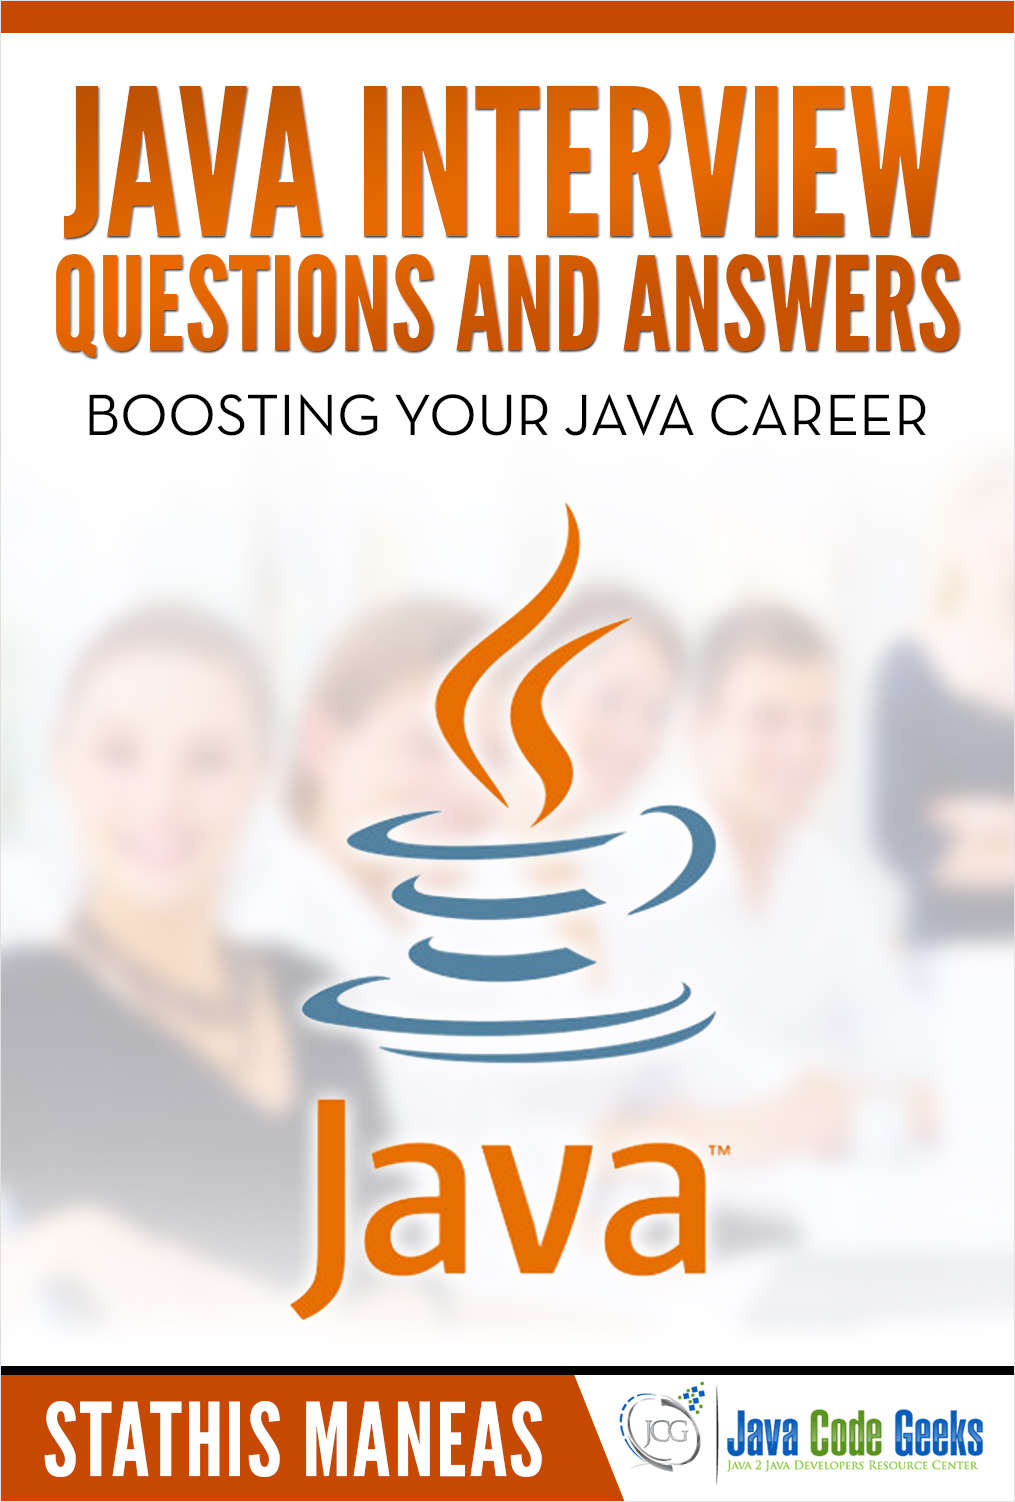 Java Interview Questions and Answers by Stathis Maneas